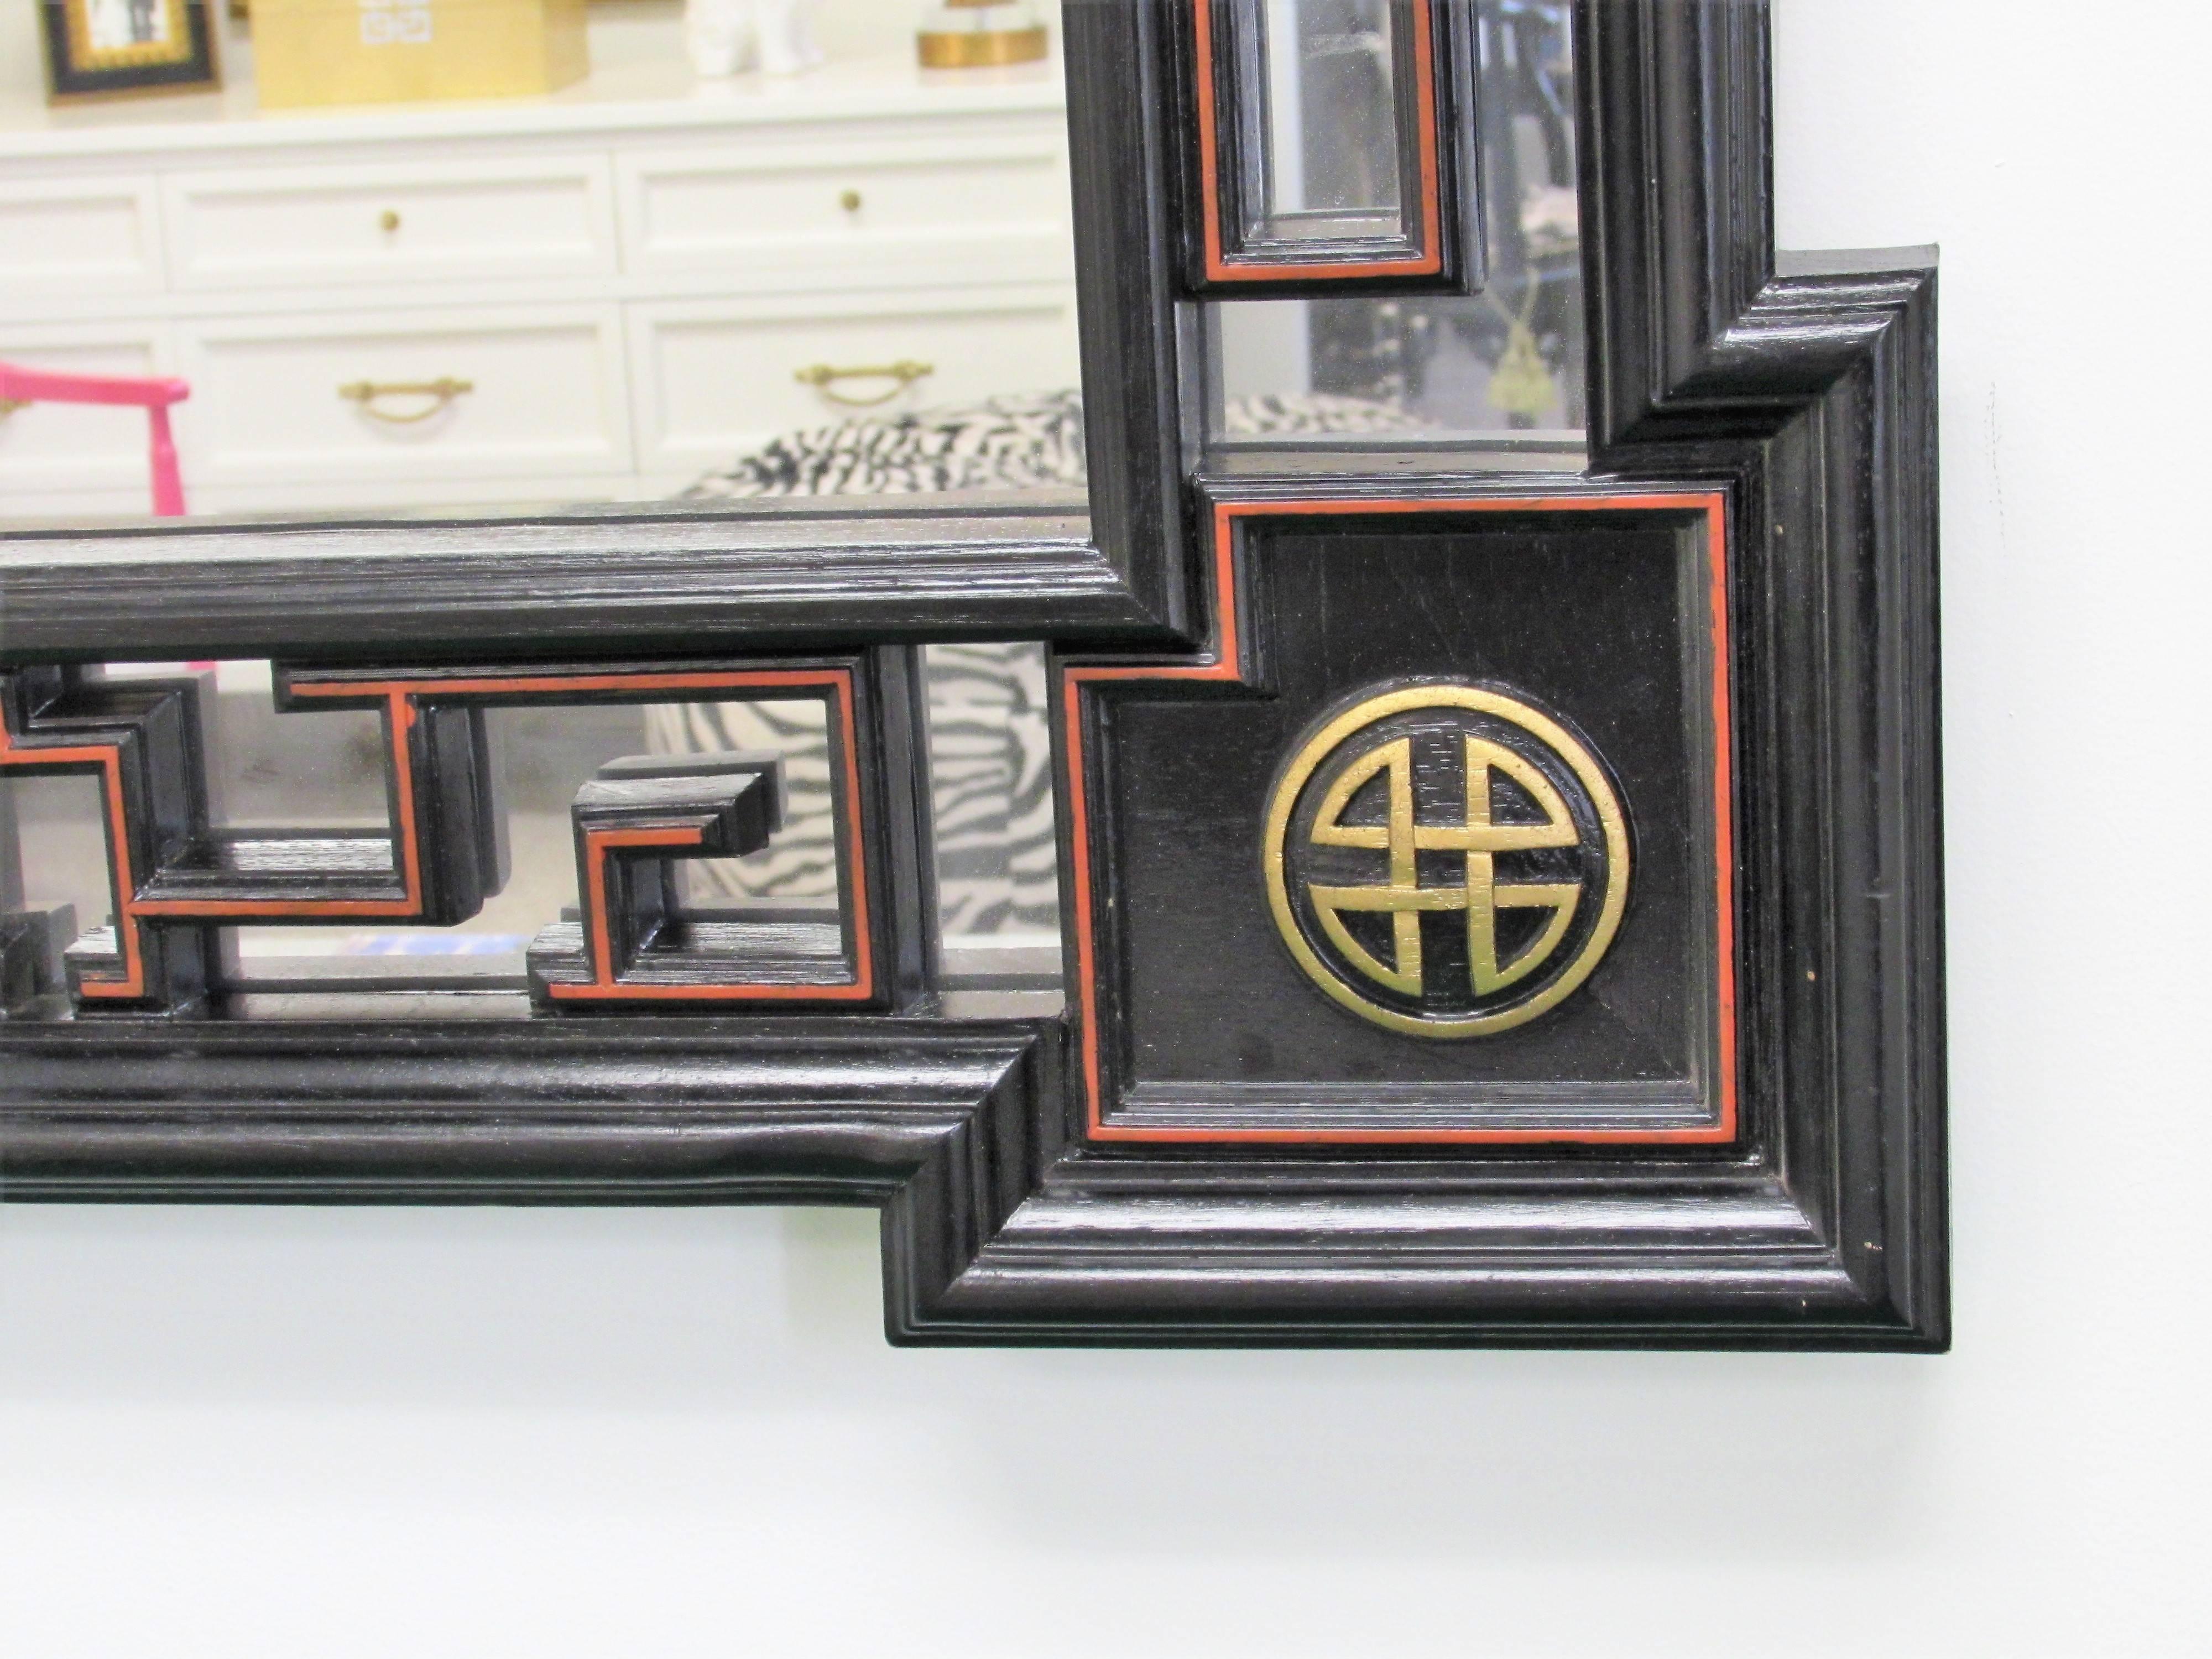 Large Greek key ebonized mirror, each corner is gilded chinoiserie design with red outlines on all sides, can be hung vertical or horizontal.